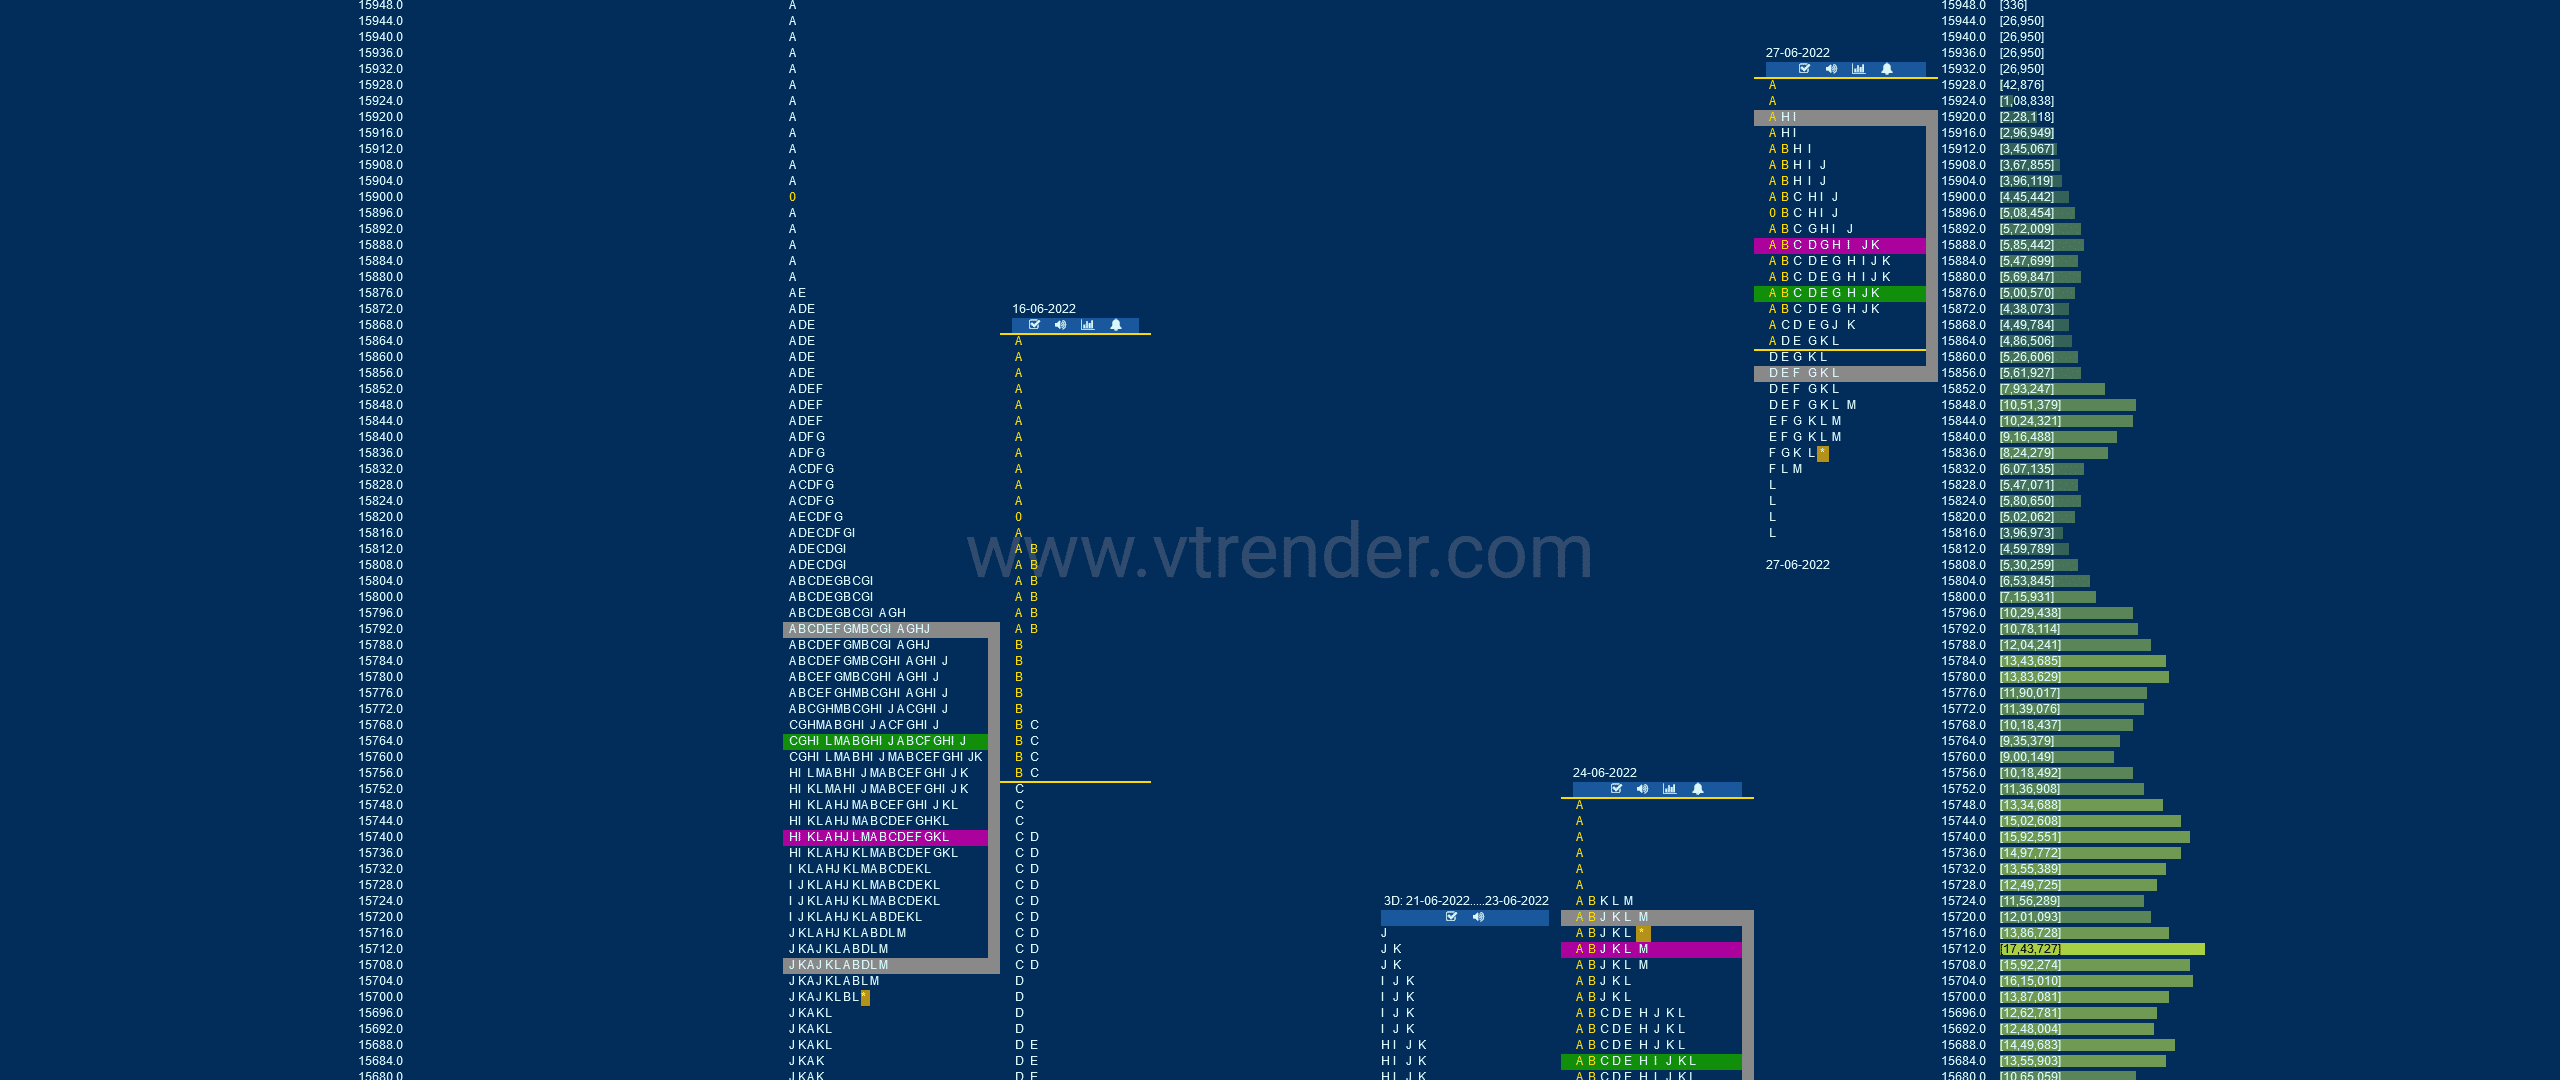 Nf 19 Market Profile Analysis Dated 27Th Jun 2022 Banknifty Futures, Charts, Day Trading, Intraday Trading, Intraday Trading Strategies, Market Profile, Market Profile Trading Strategies, Nifty Futures, Order Flow Analysis, Support And Resistance, Technical Analysis, Trading Strategies, Volume Profile Trading